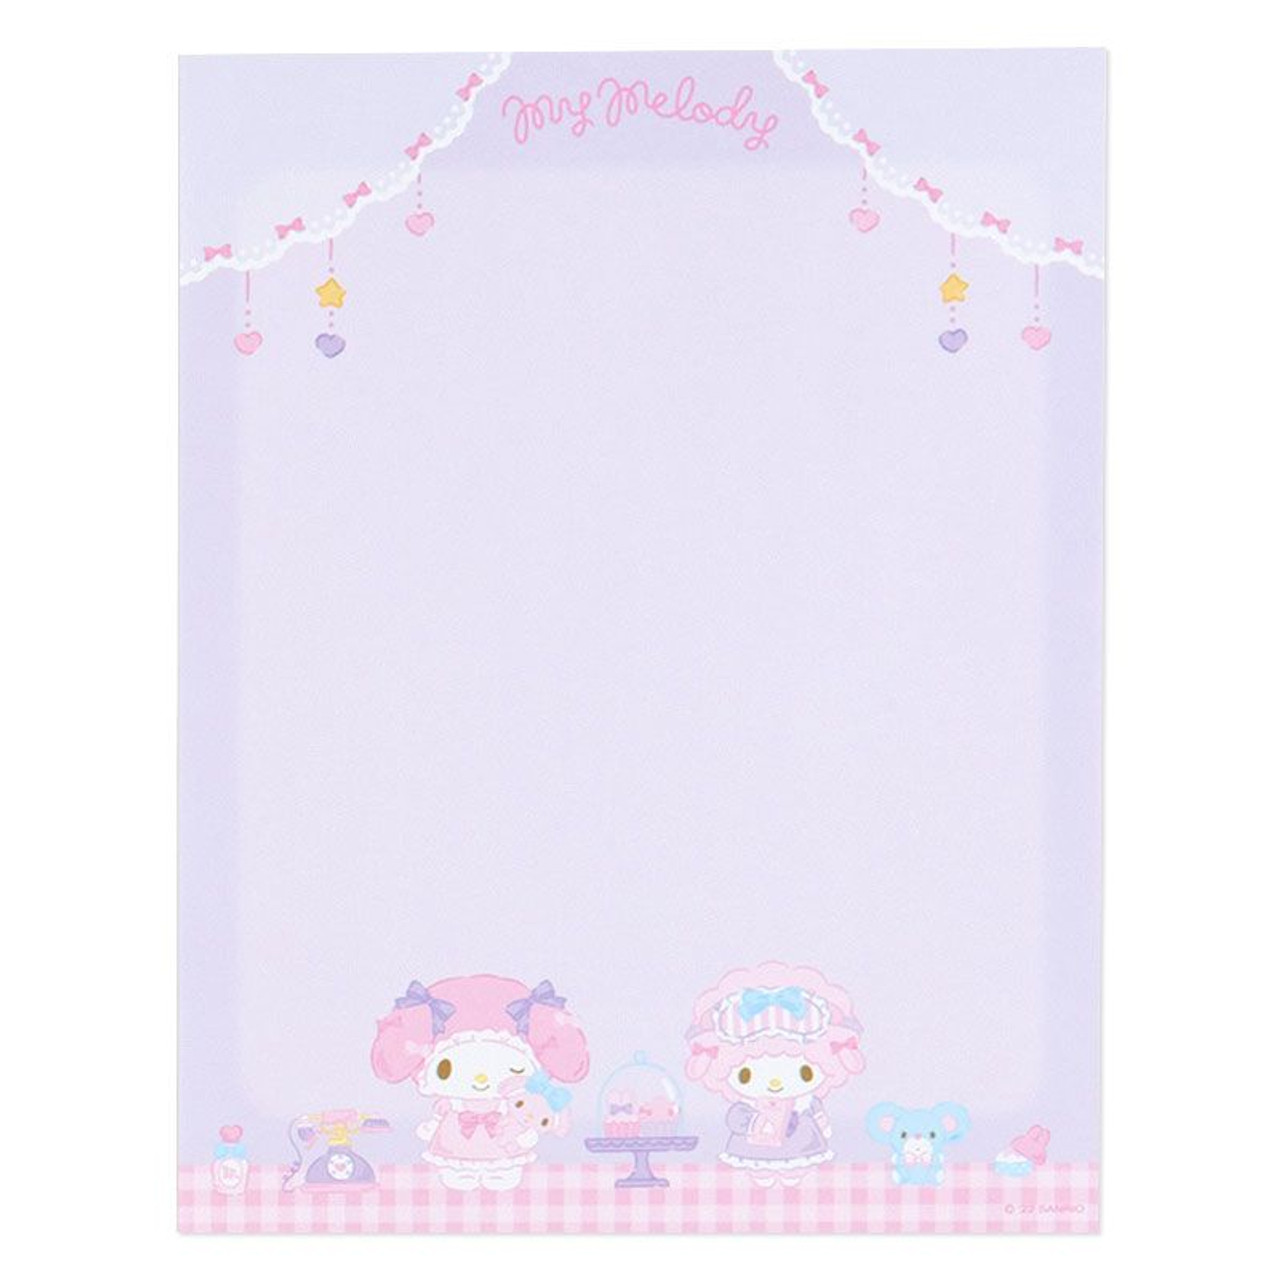 Japan Sanrio Stationery Letter Set - My Melody / Pink Love